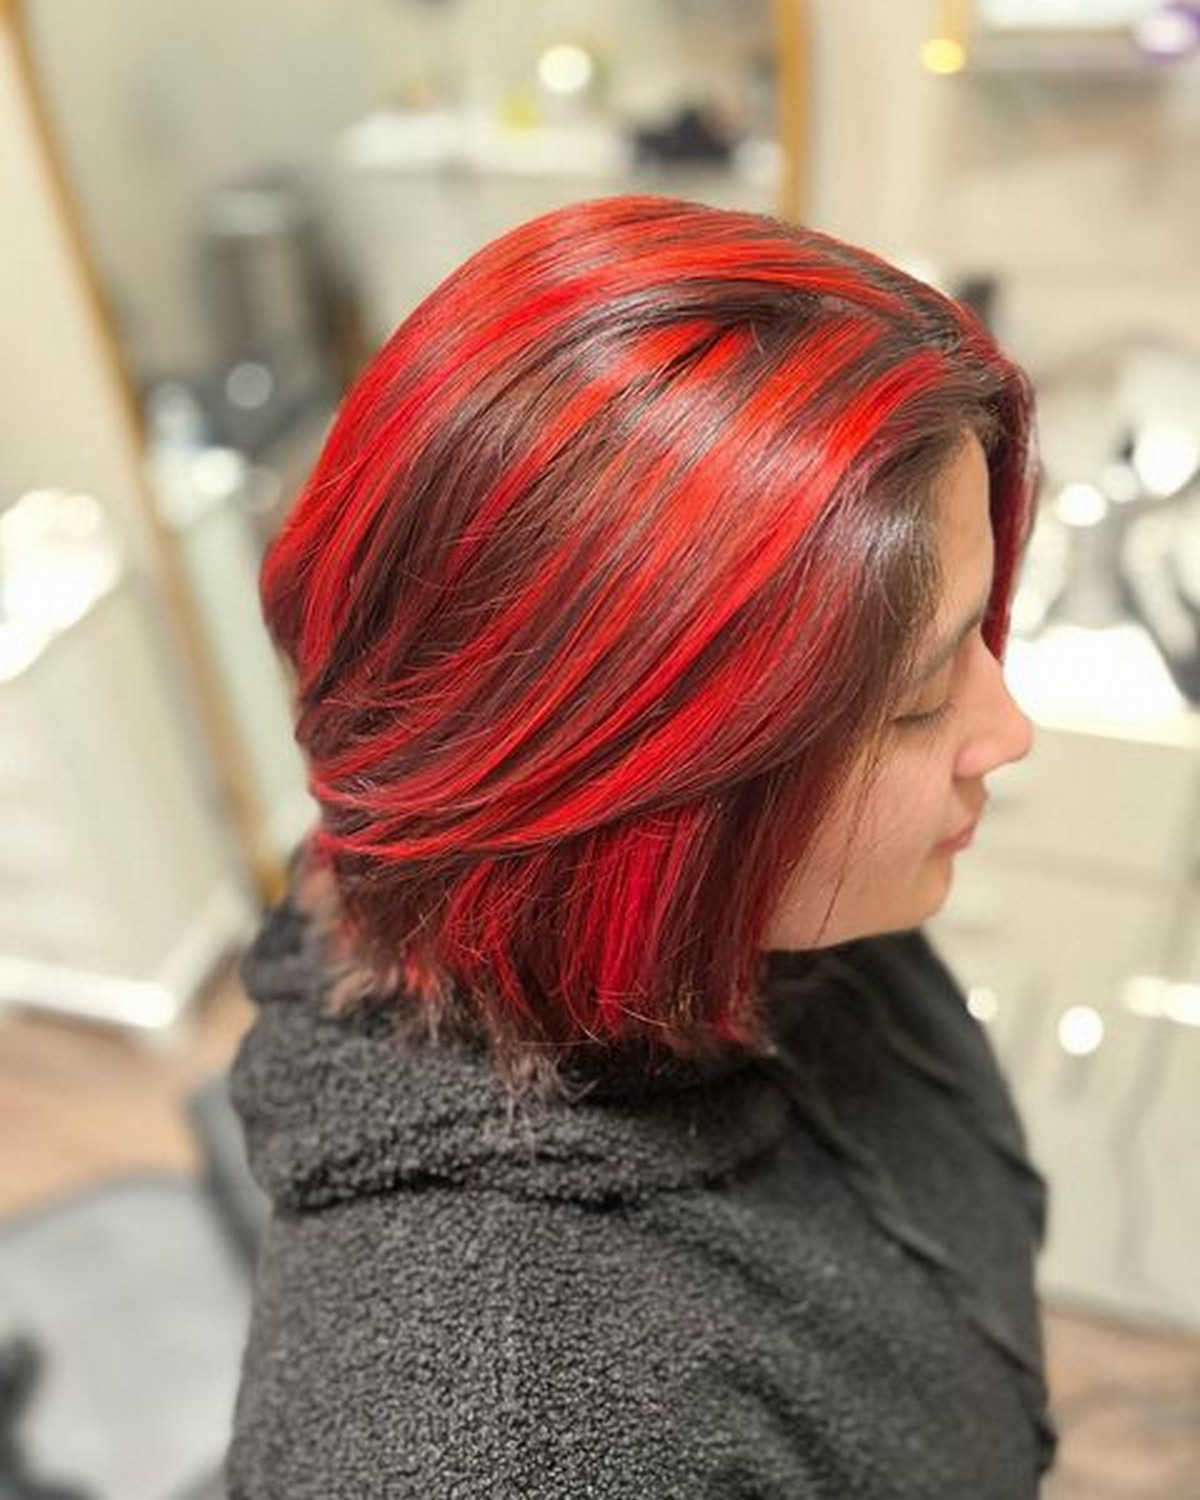 Black Hair And Red Highlights